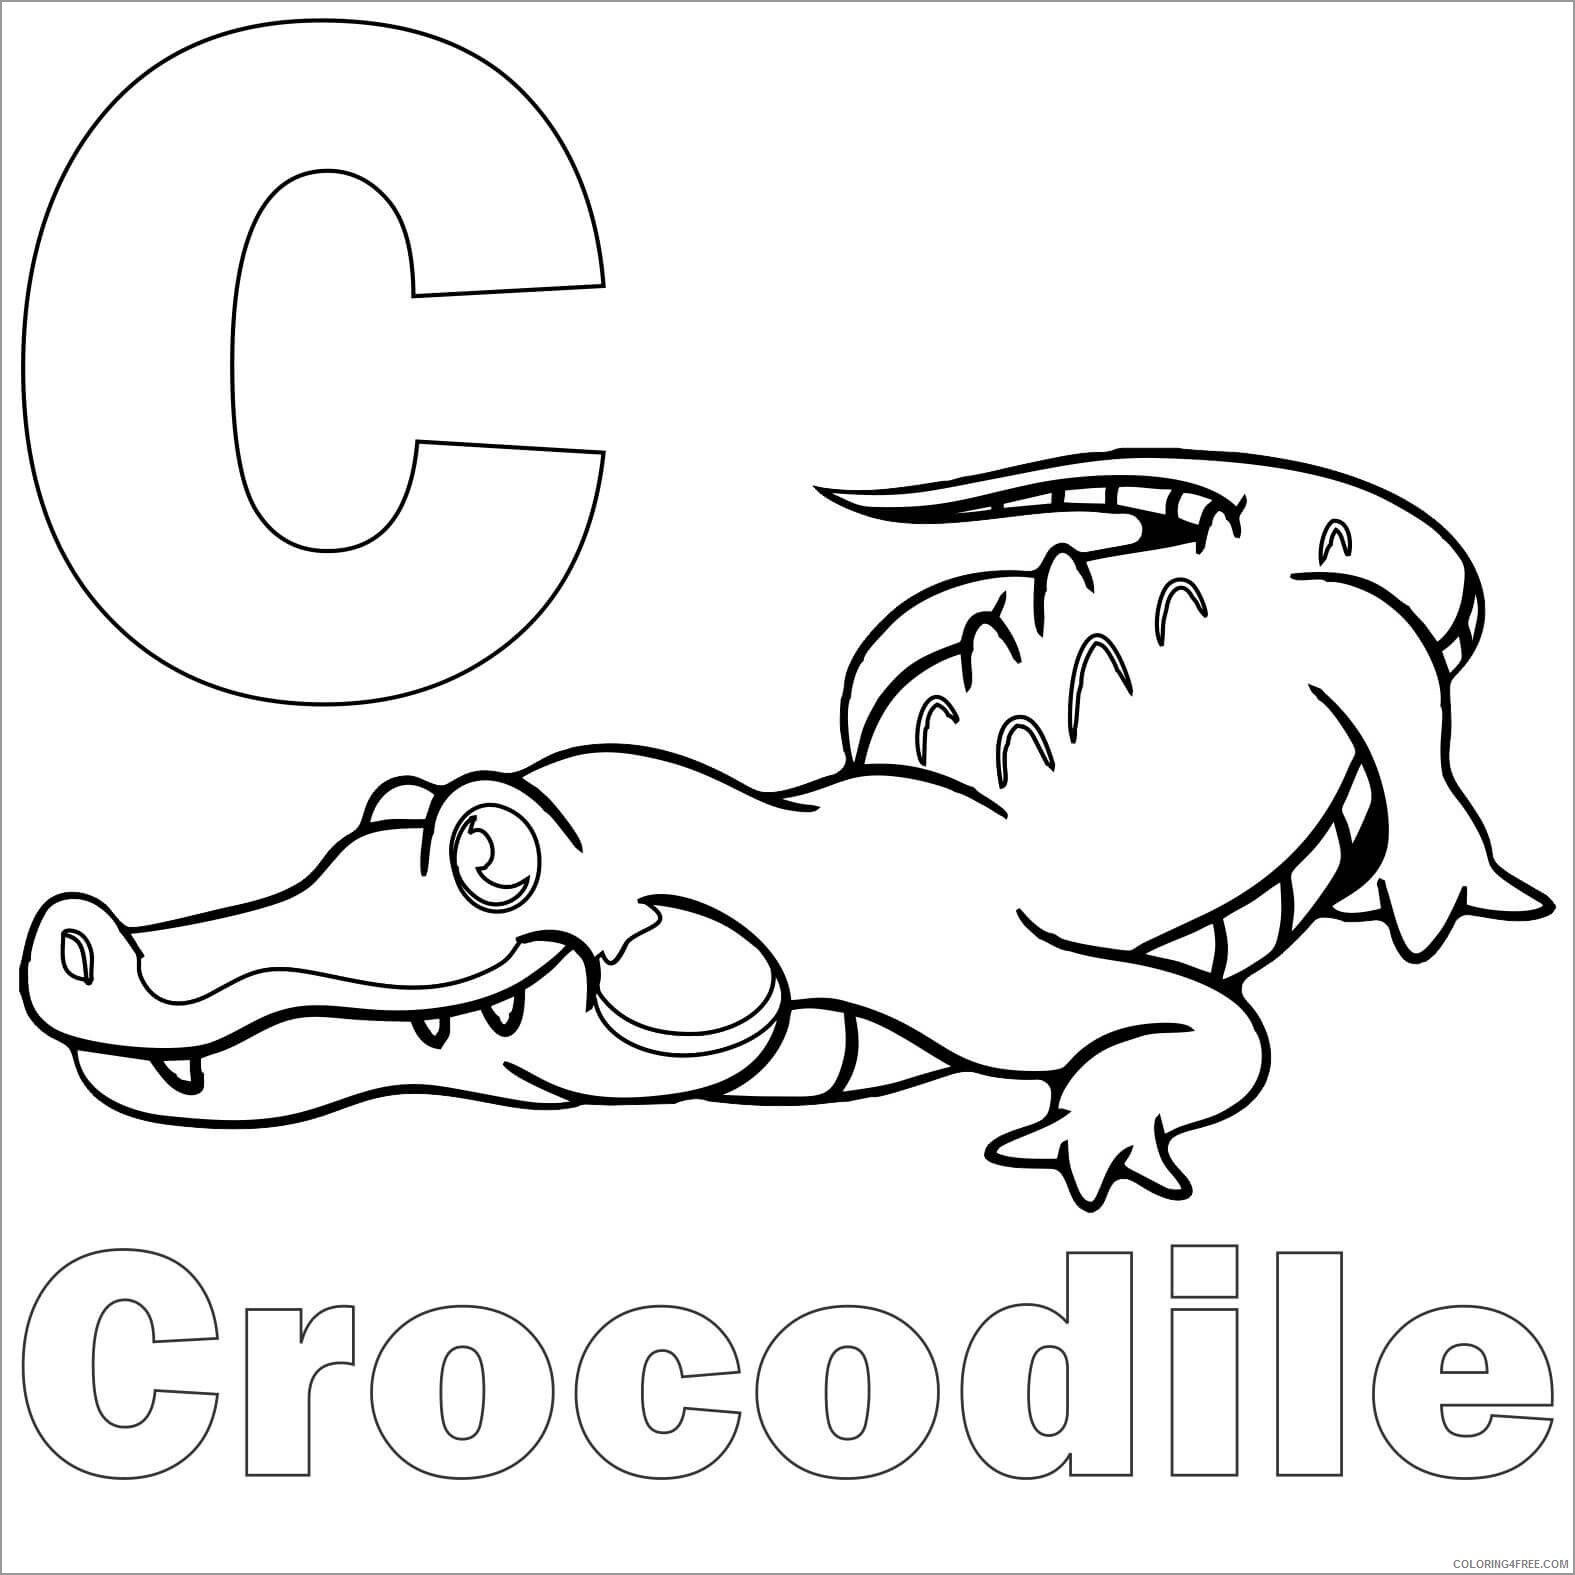 Crocodile Coloring Pages Animal Printable Sheets c for crocodile for kids 2021 1295 Coloring4free